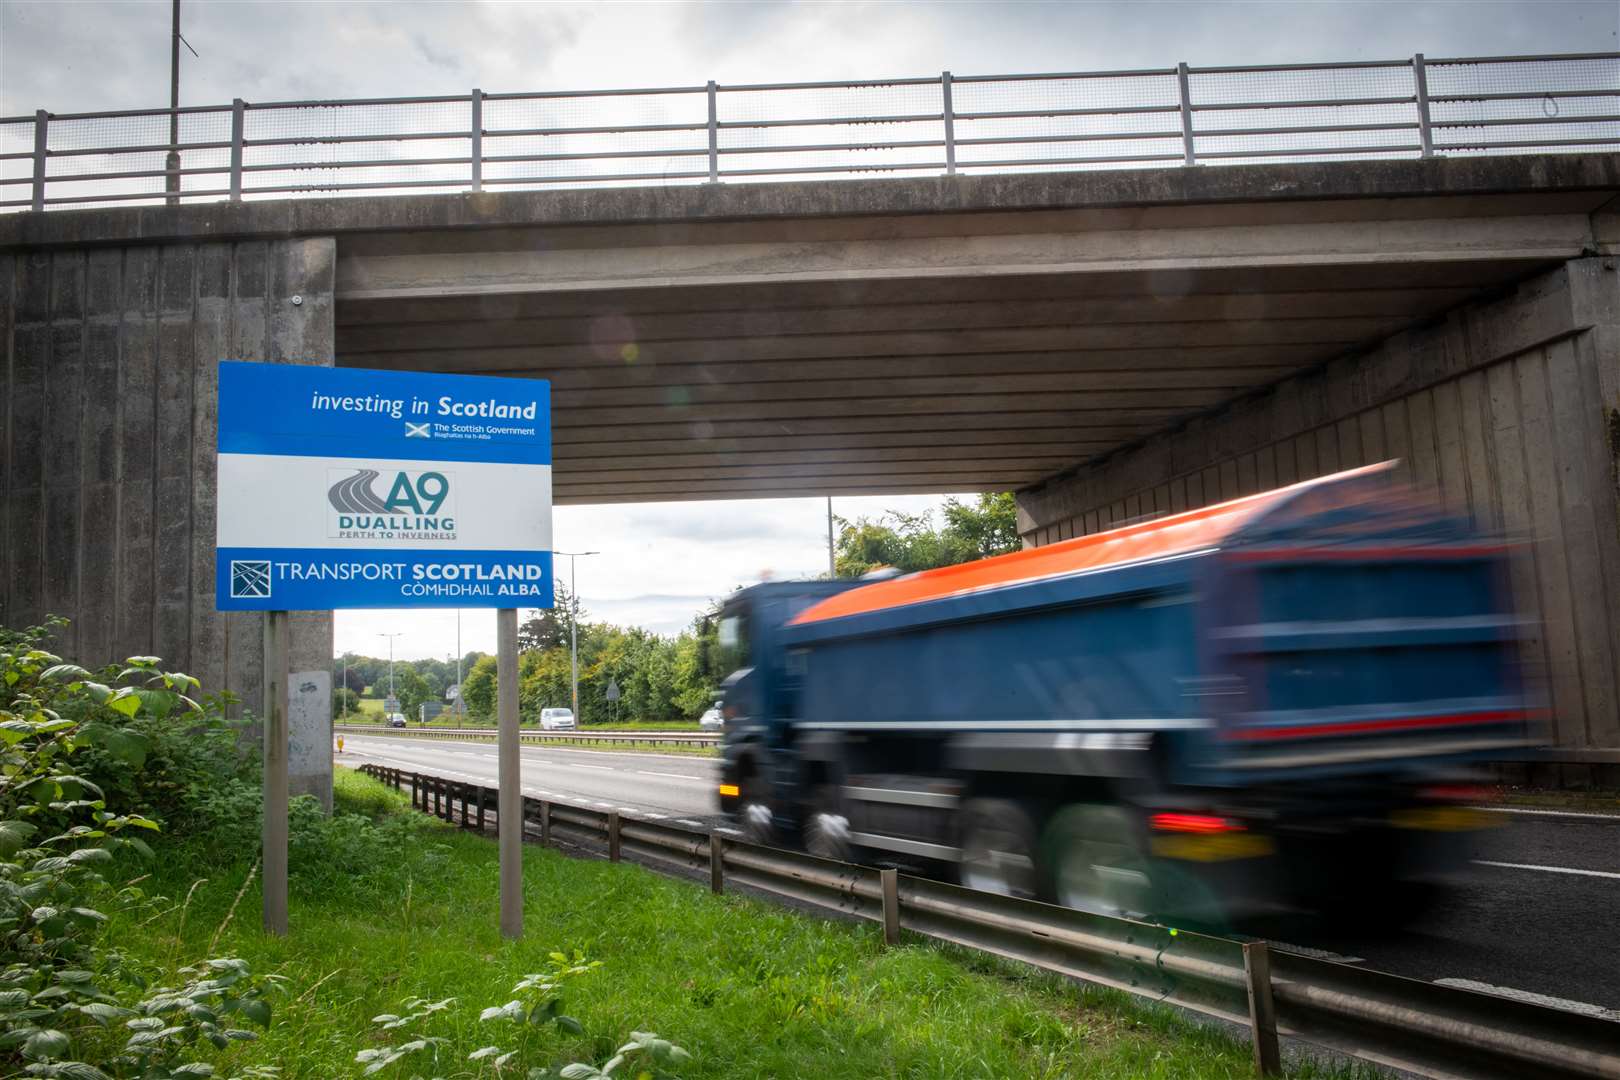 A9 dualling project sign.